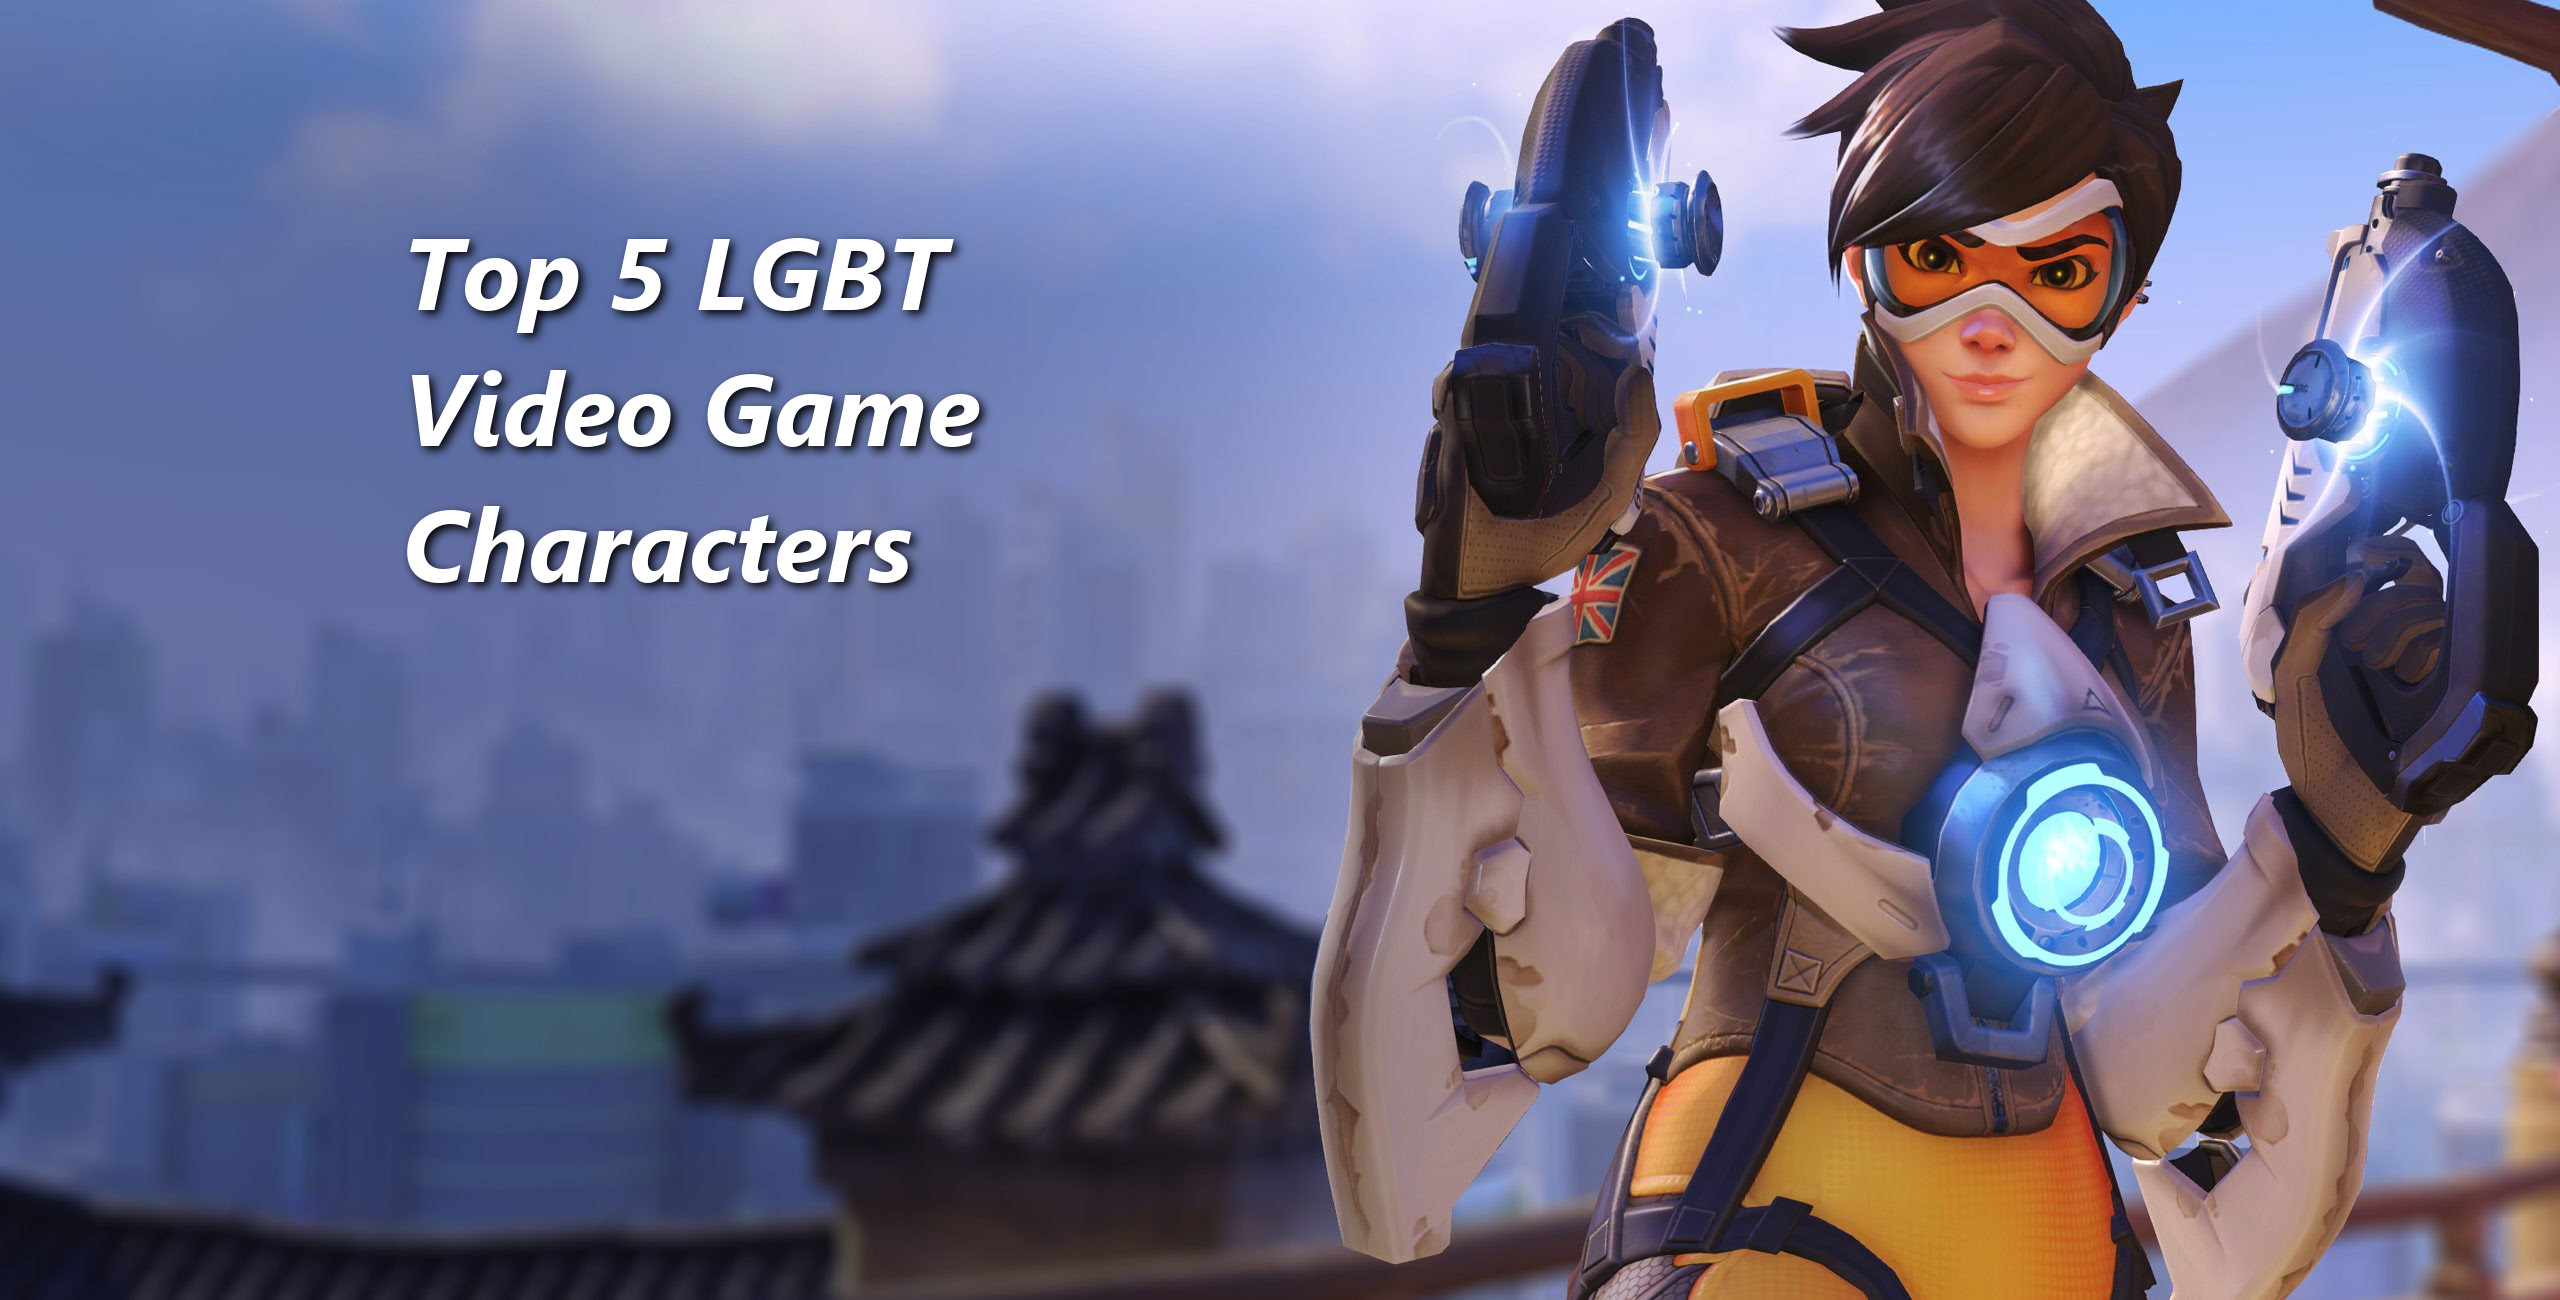 Top 5 LGBT Video Game Characters #6